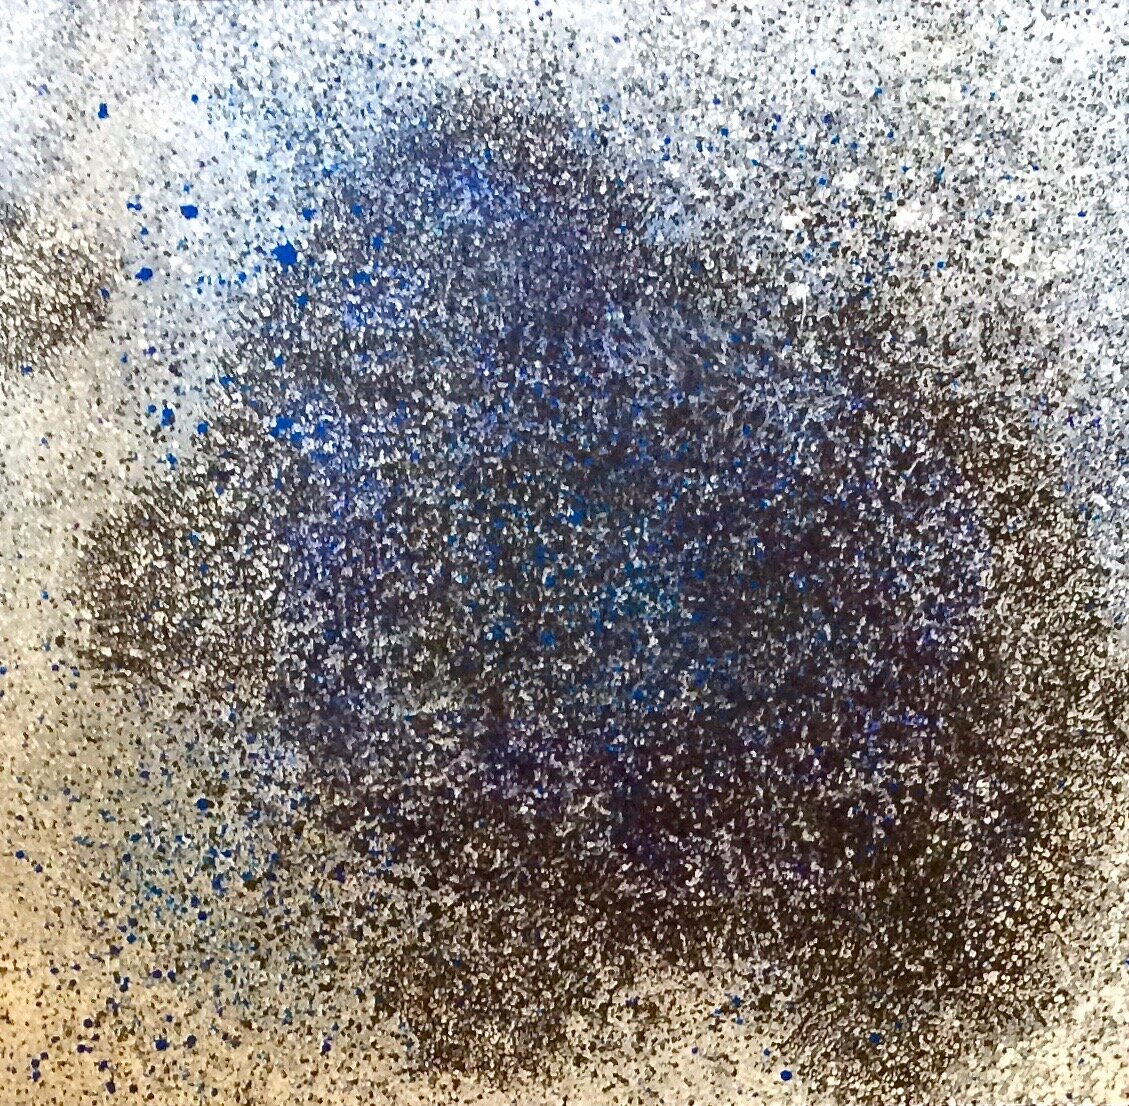  Blue Particles, 2018 59 x 61 inches Acrylic on 2/8”closed cell black foam 